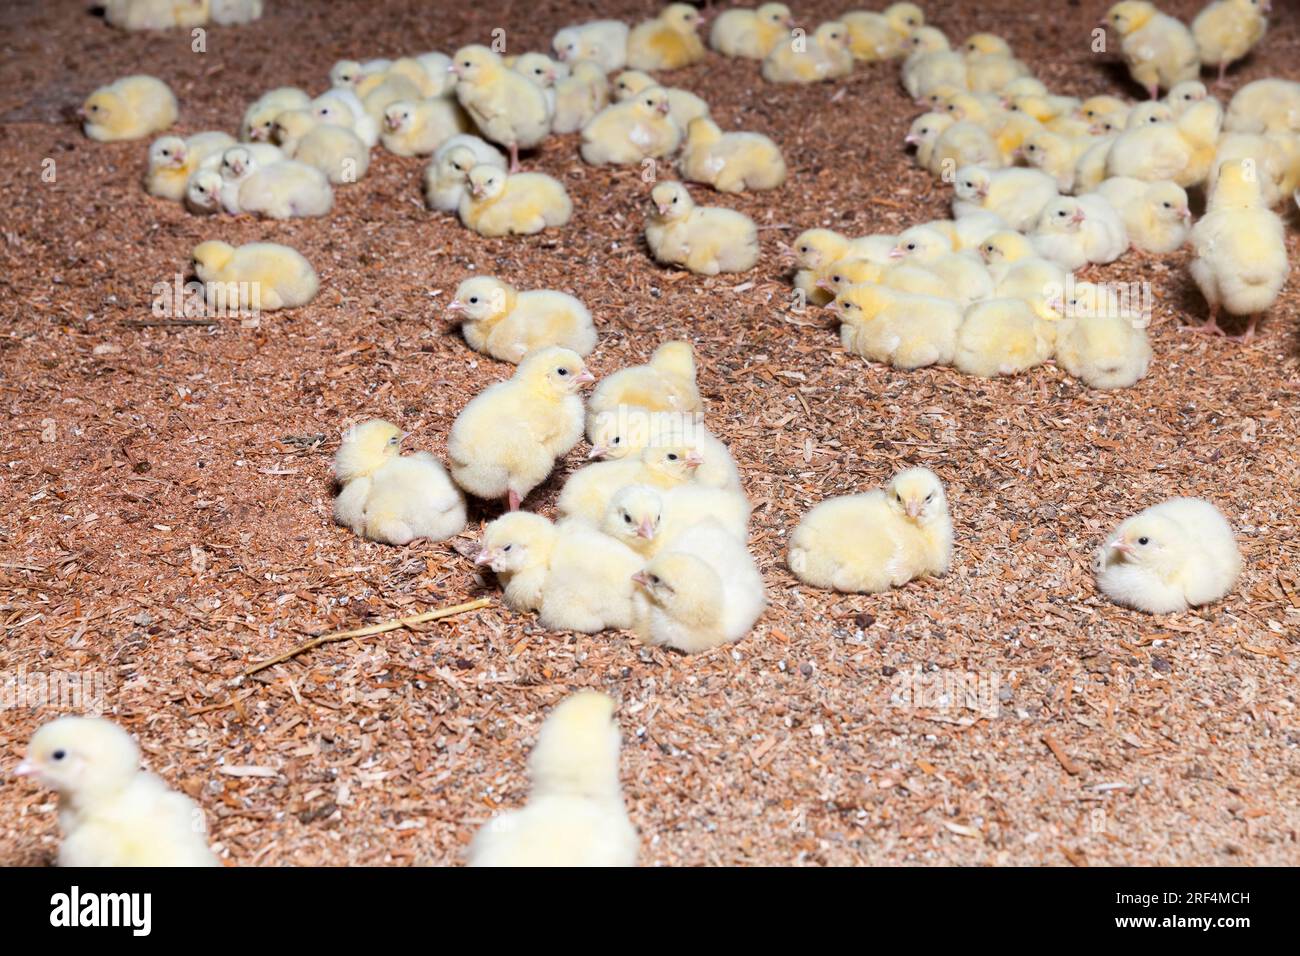 chicken hicks in a poultry farm where chicken is raised for meat and other products, young chicken hicks in a large room for industrial breeding Stock Photo